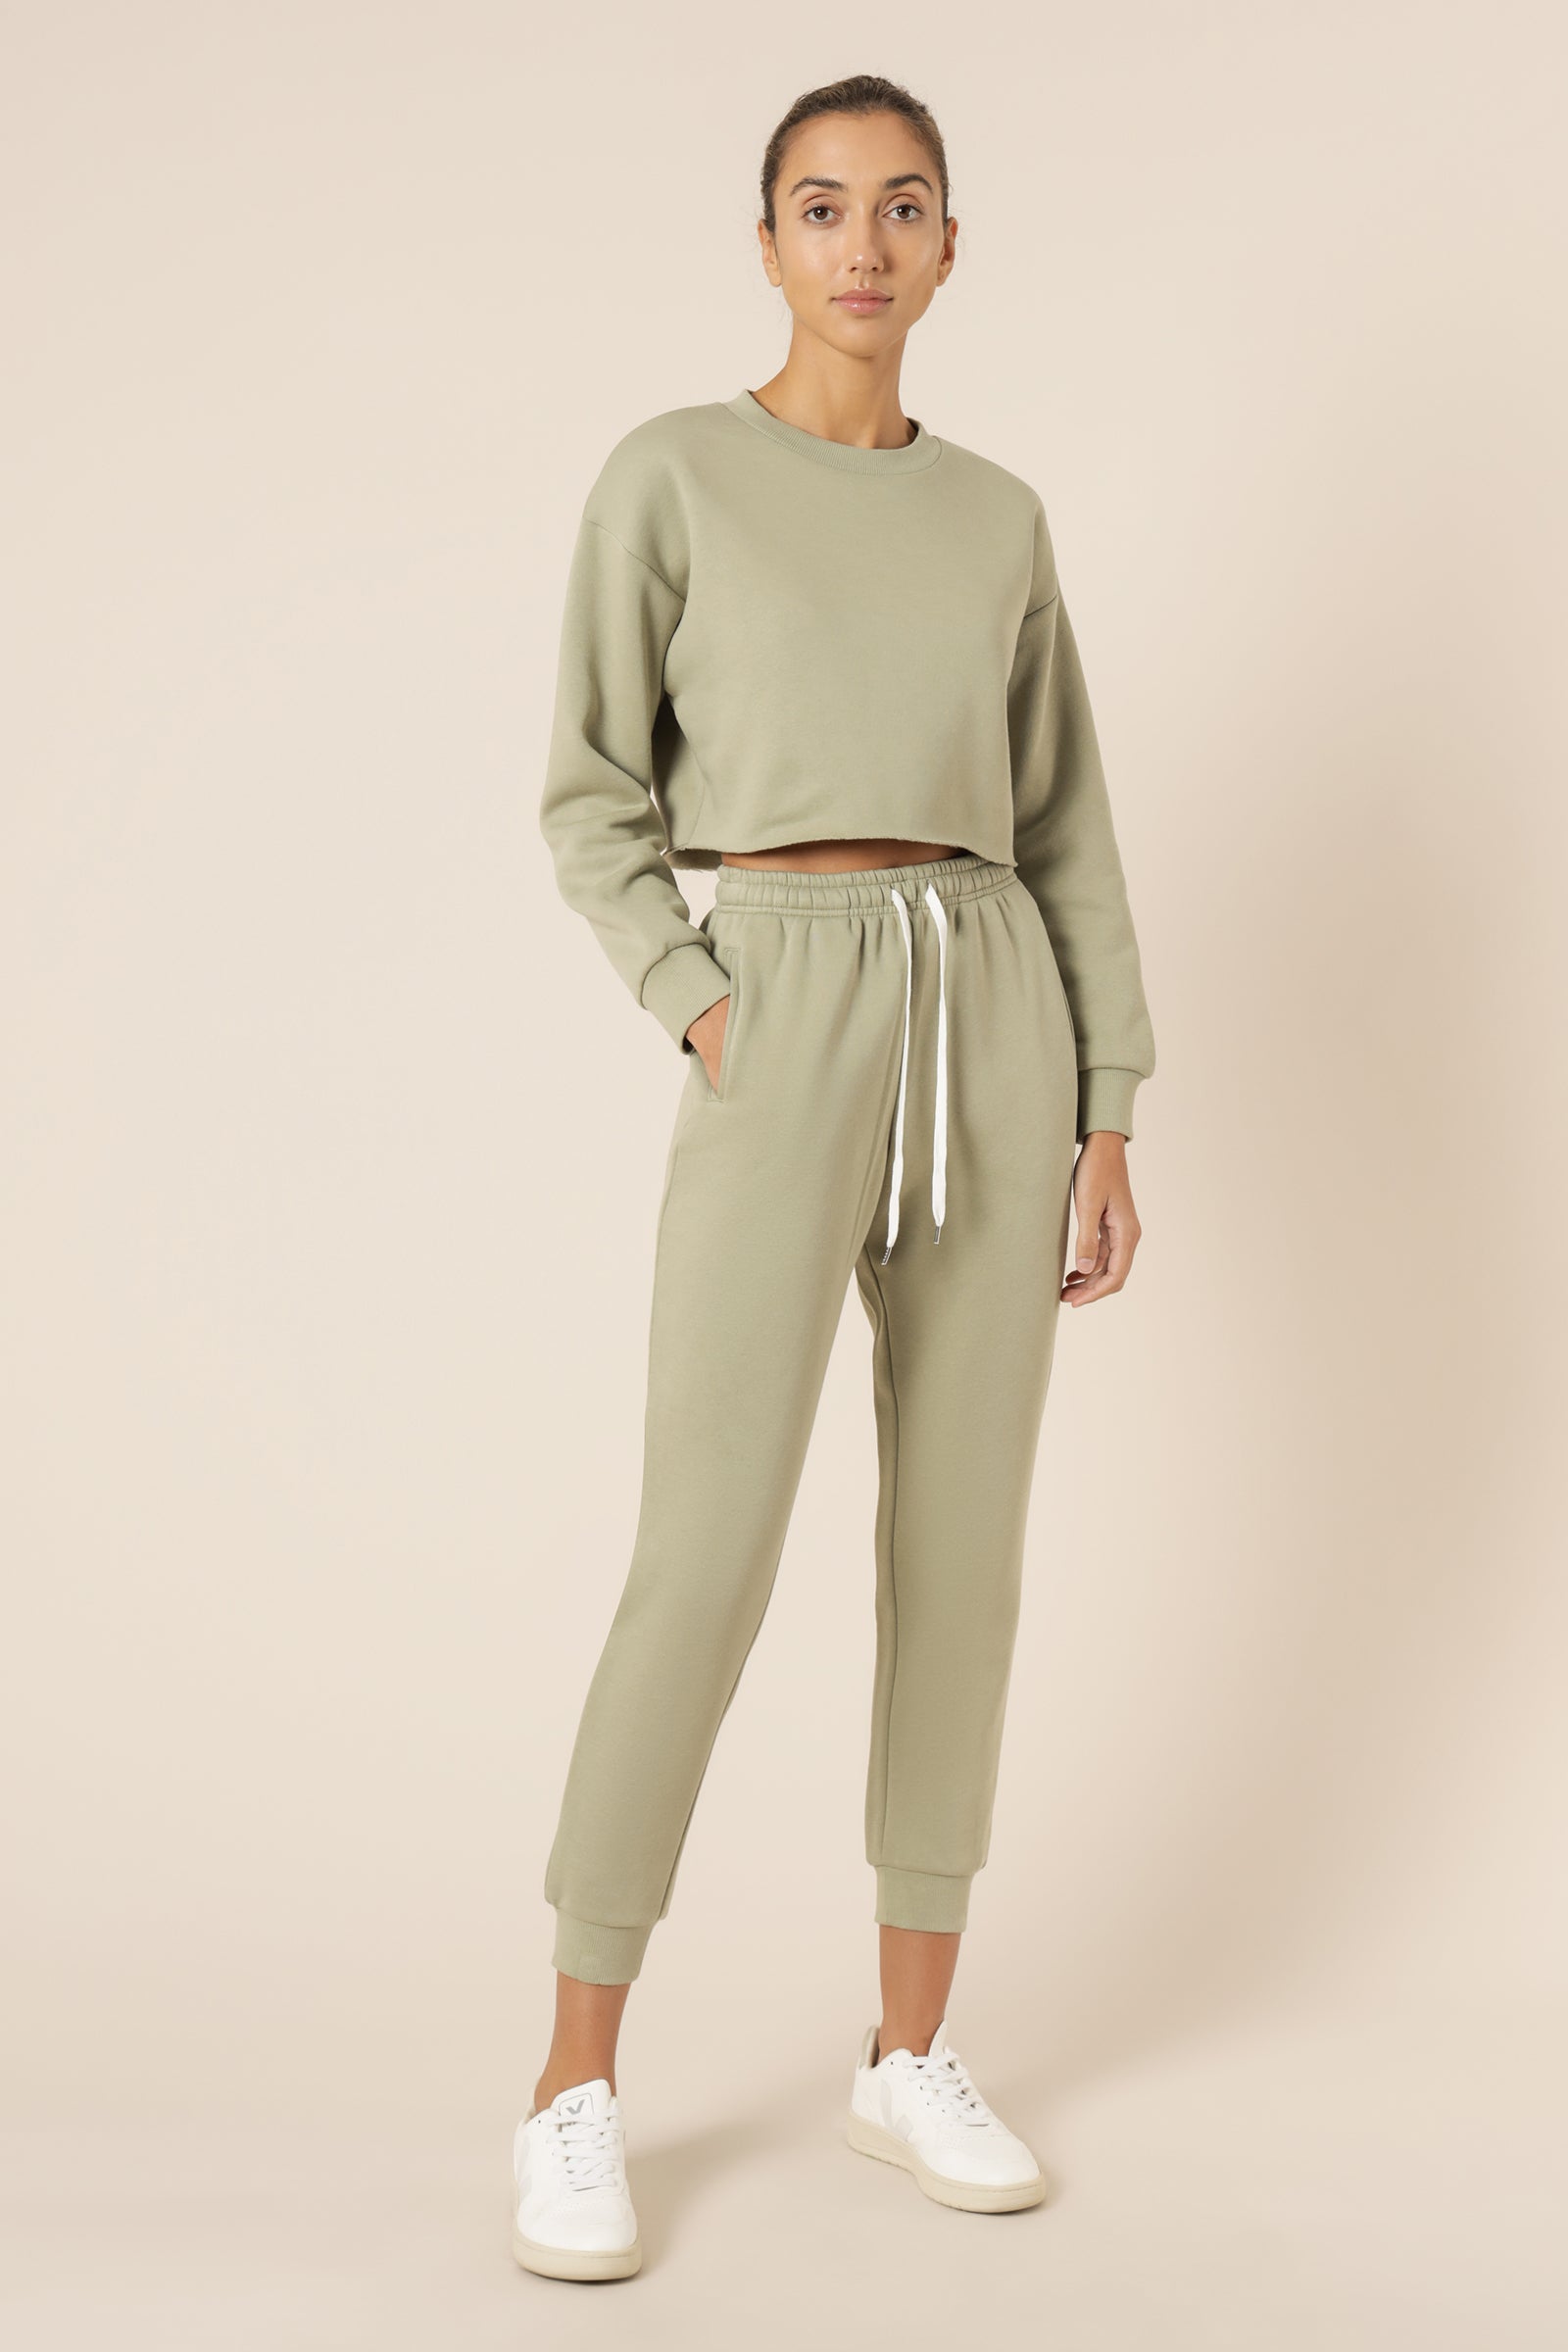 Nude Lucy carter classic crop sweat washed sage sweats